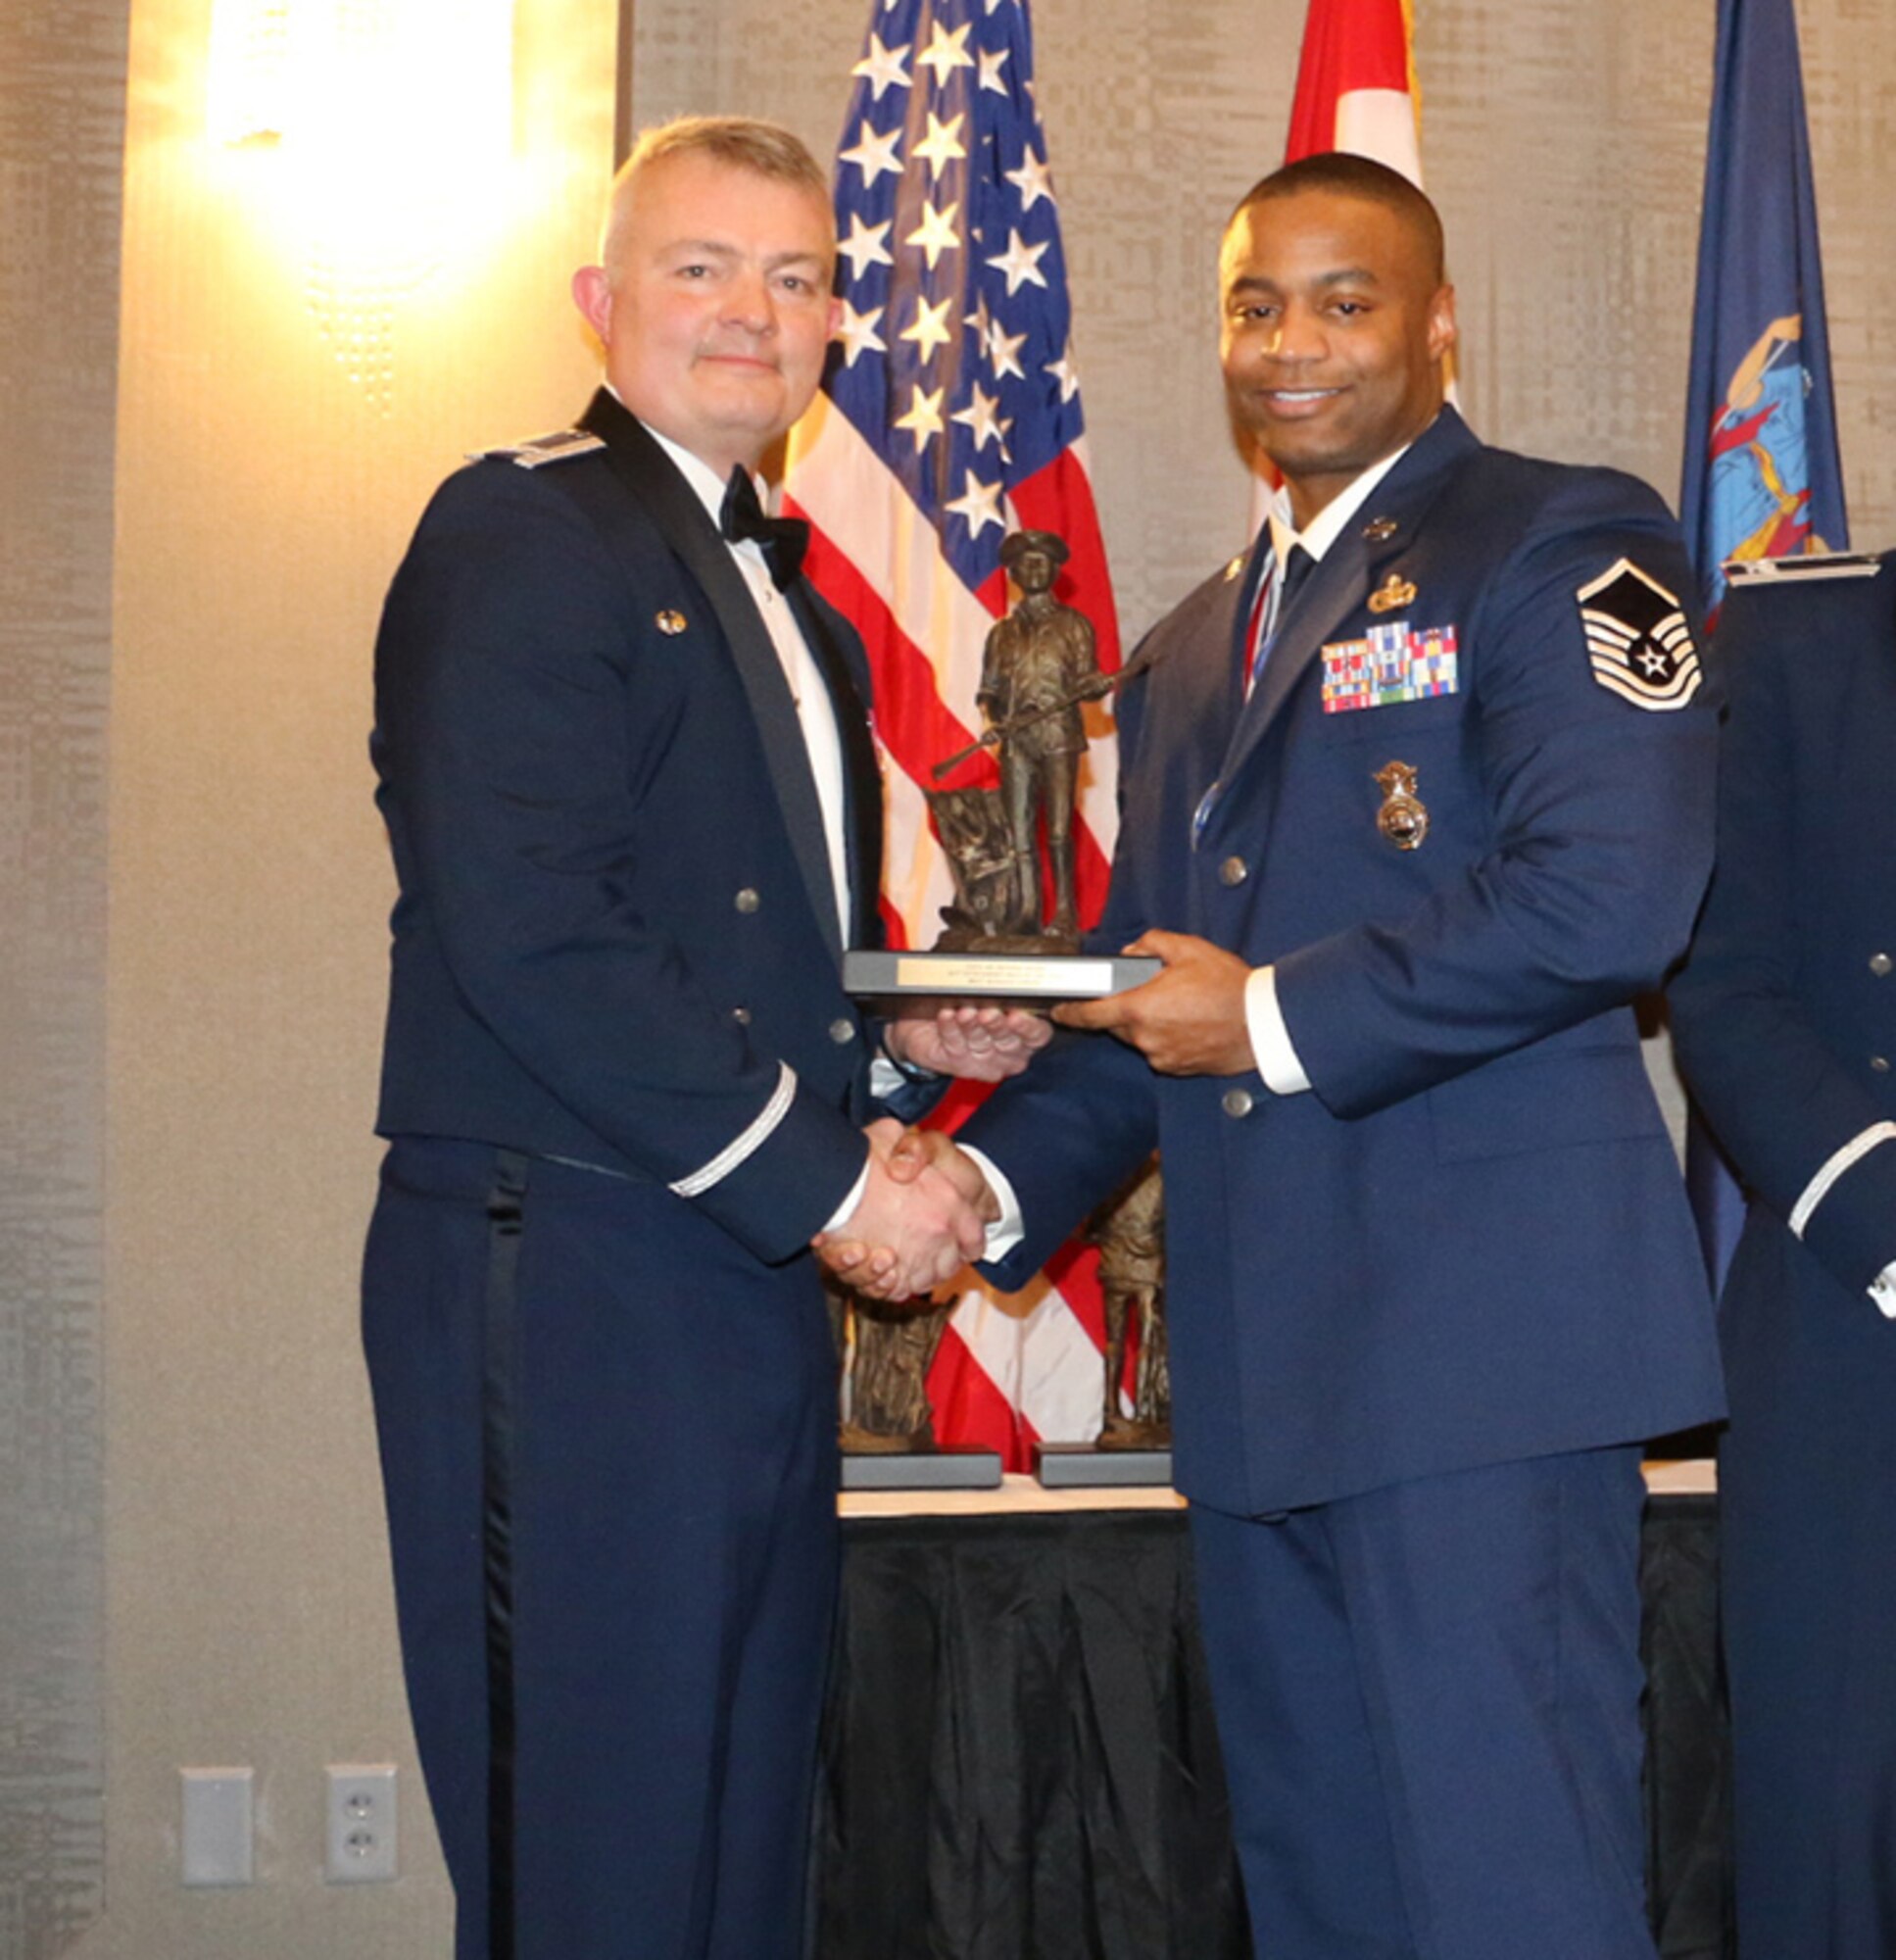 Jowers is Senior NCO of the Year